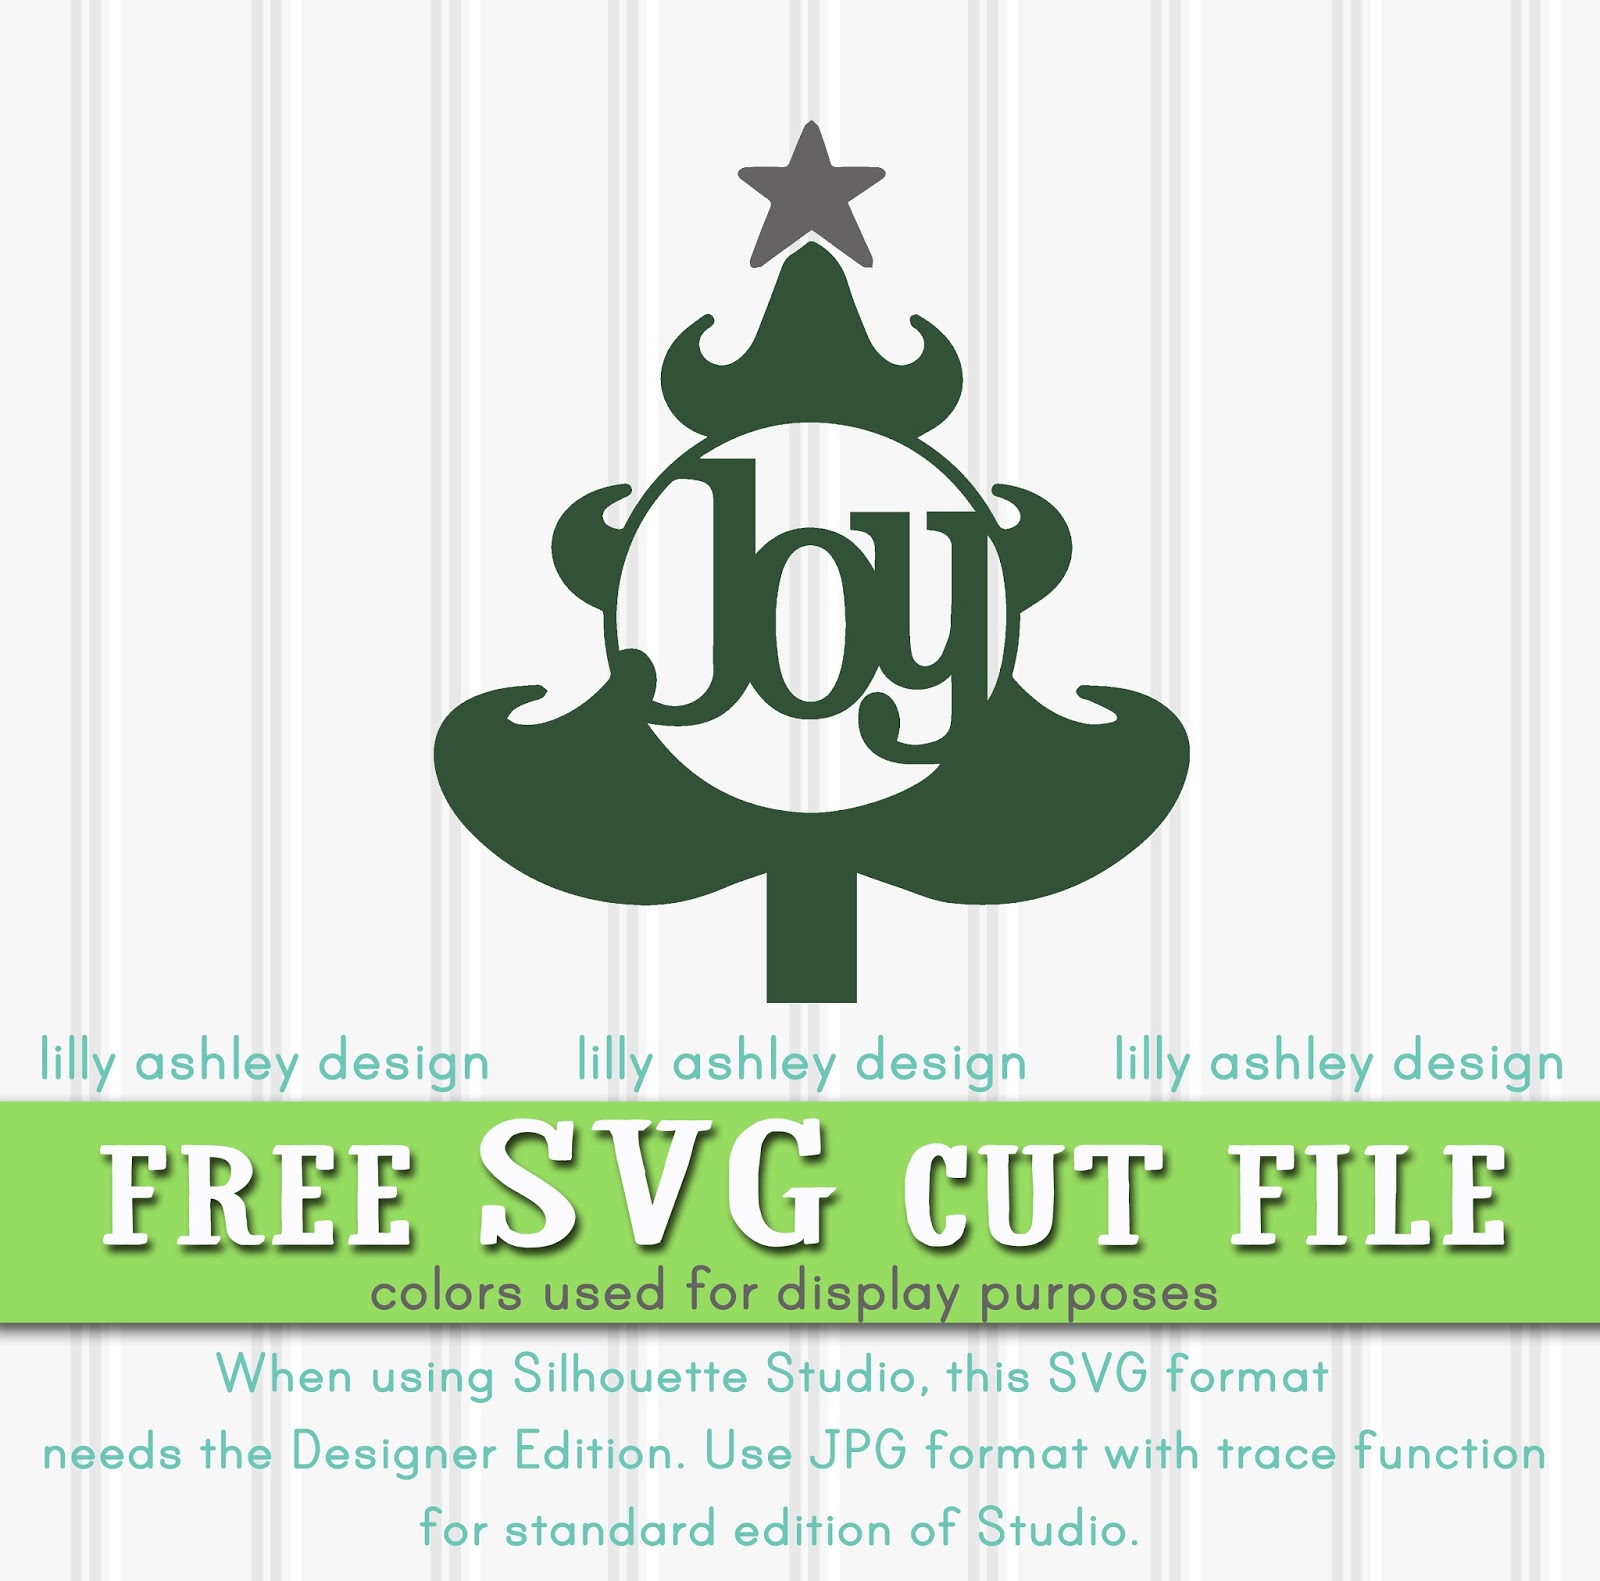 Download Make it Create by LillyAshley...Freebie Downloads: Free Christmas SVG File